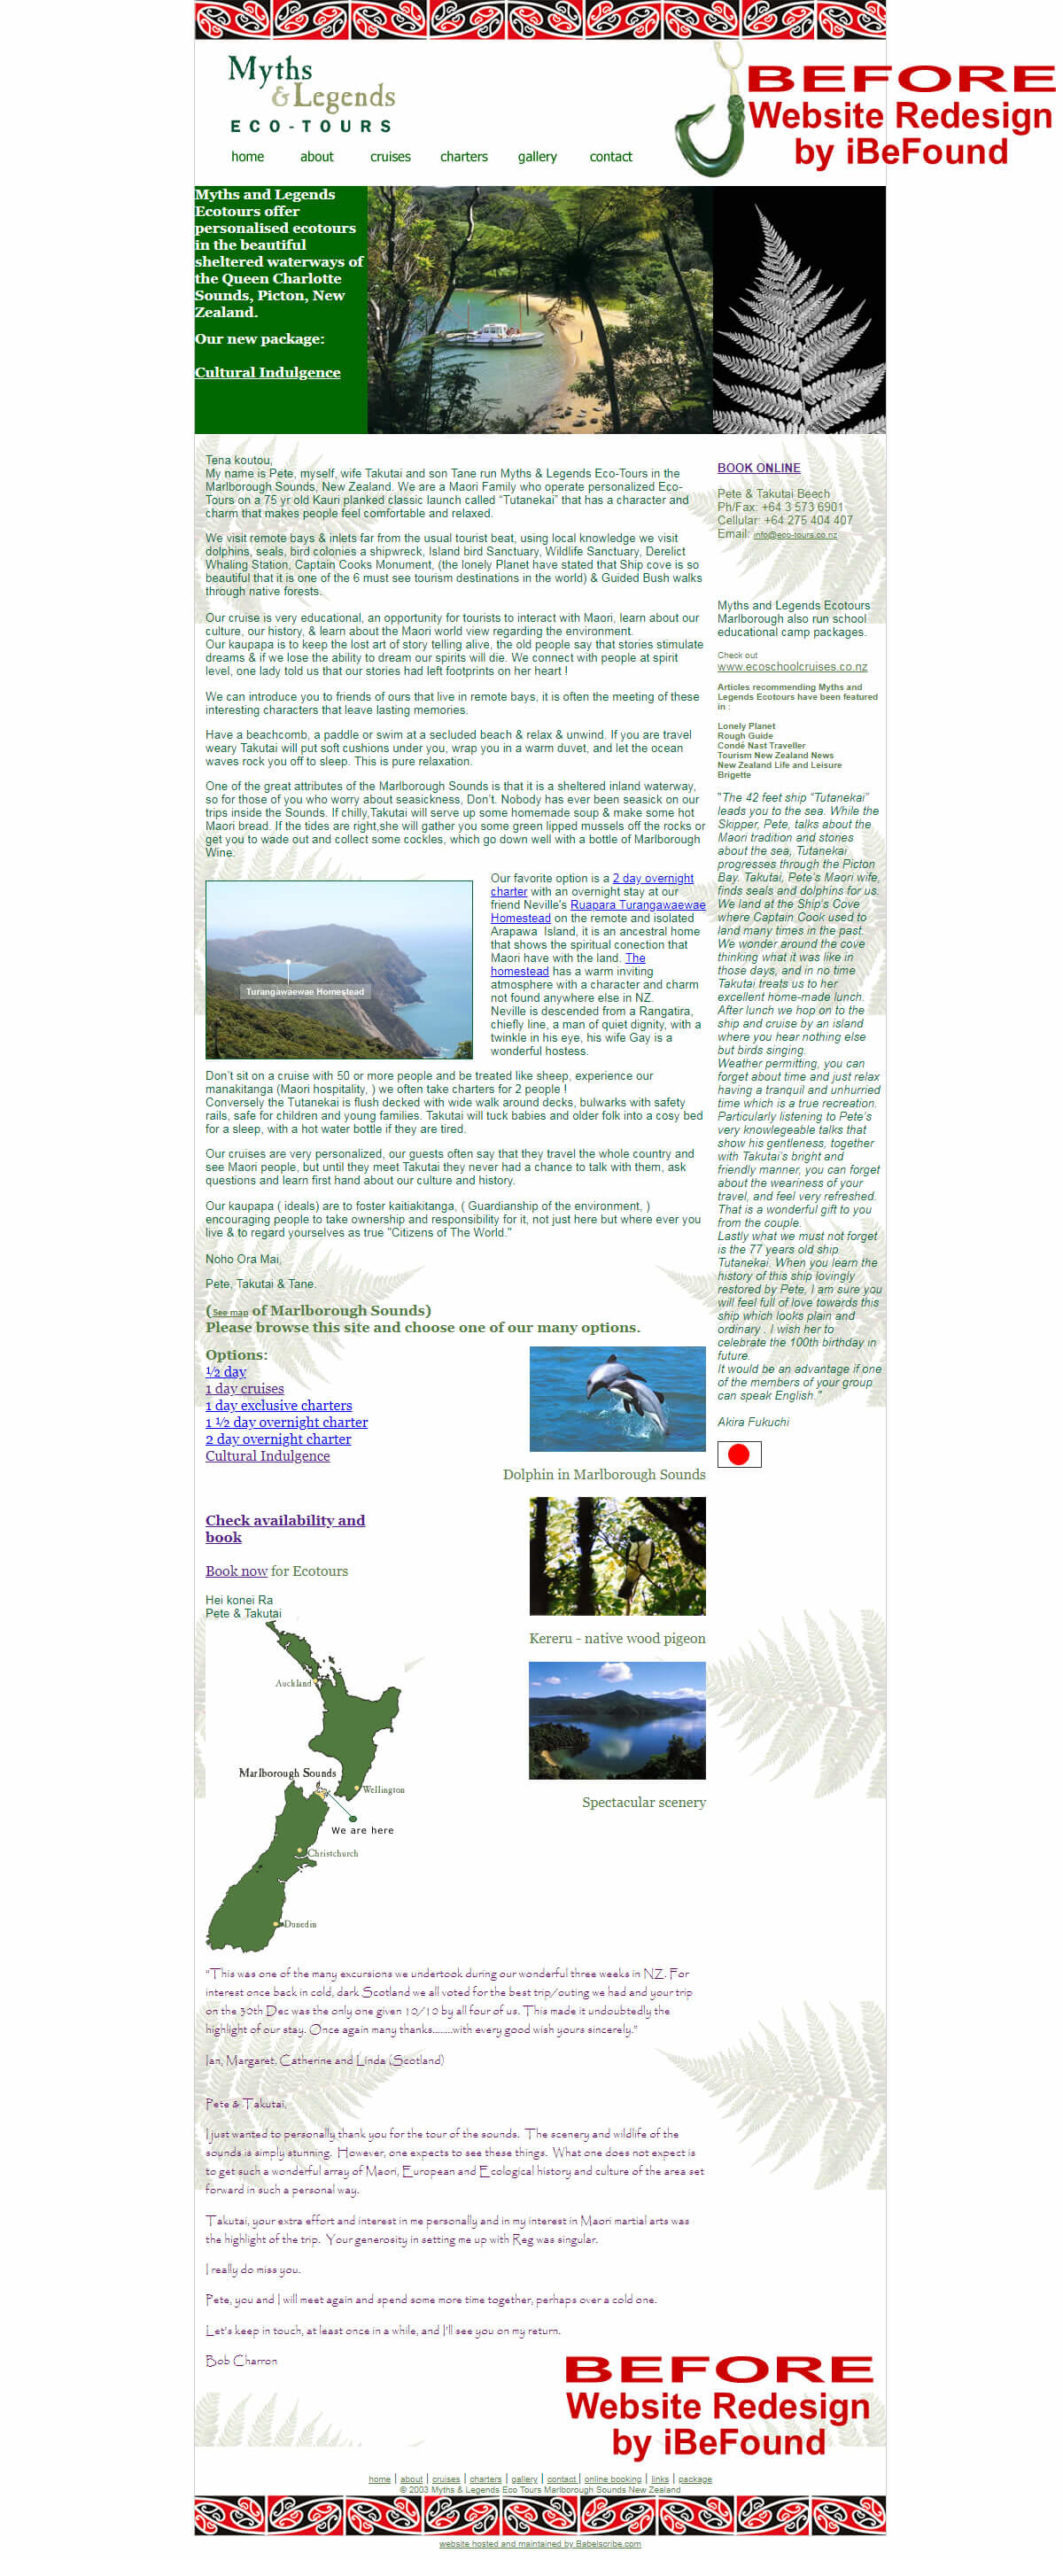 Homepage Of Maori Eco Tours Before Website Redesign By IBeFound Digital Marketing Division